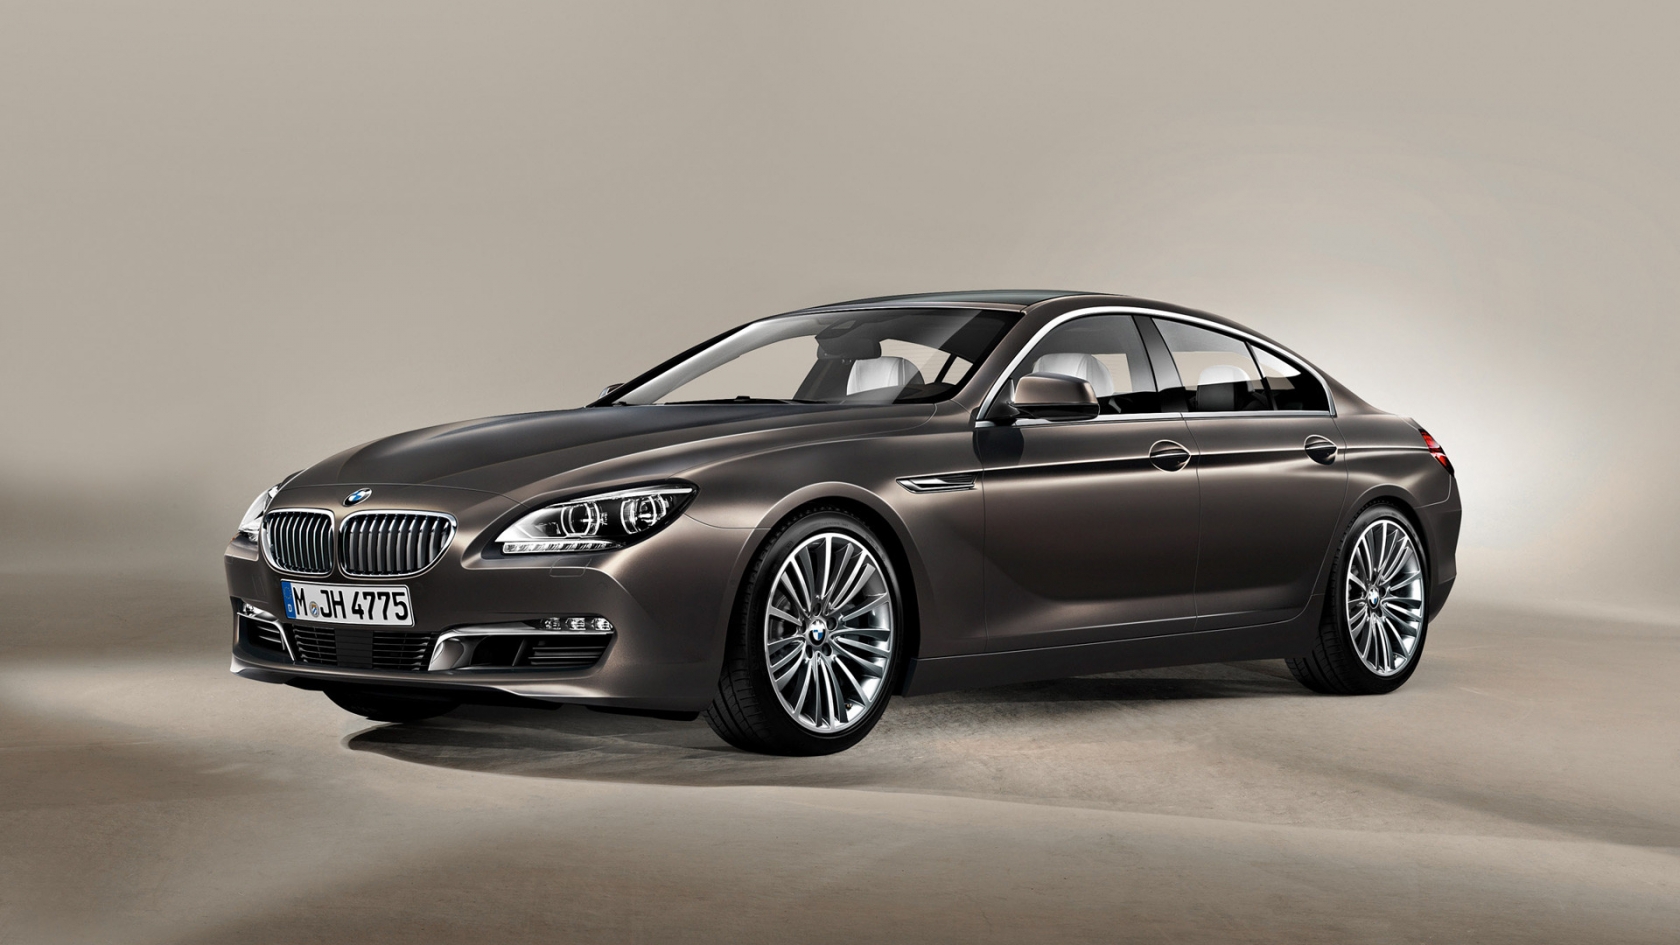 2013 BMW 6 Series Gran Coupe Studio for 1680 x 945 HDTV resolution